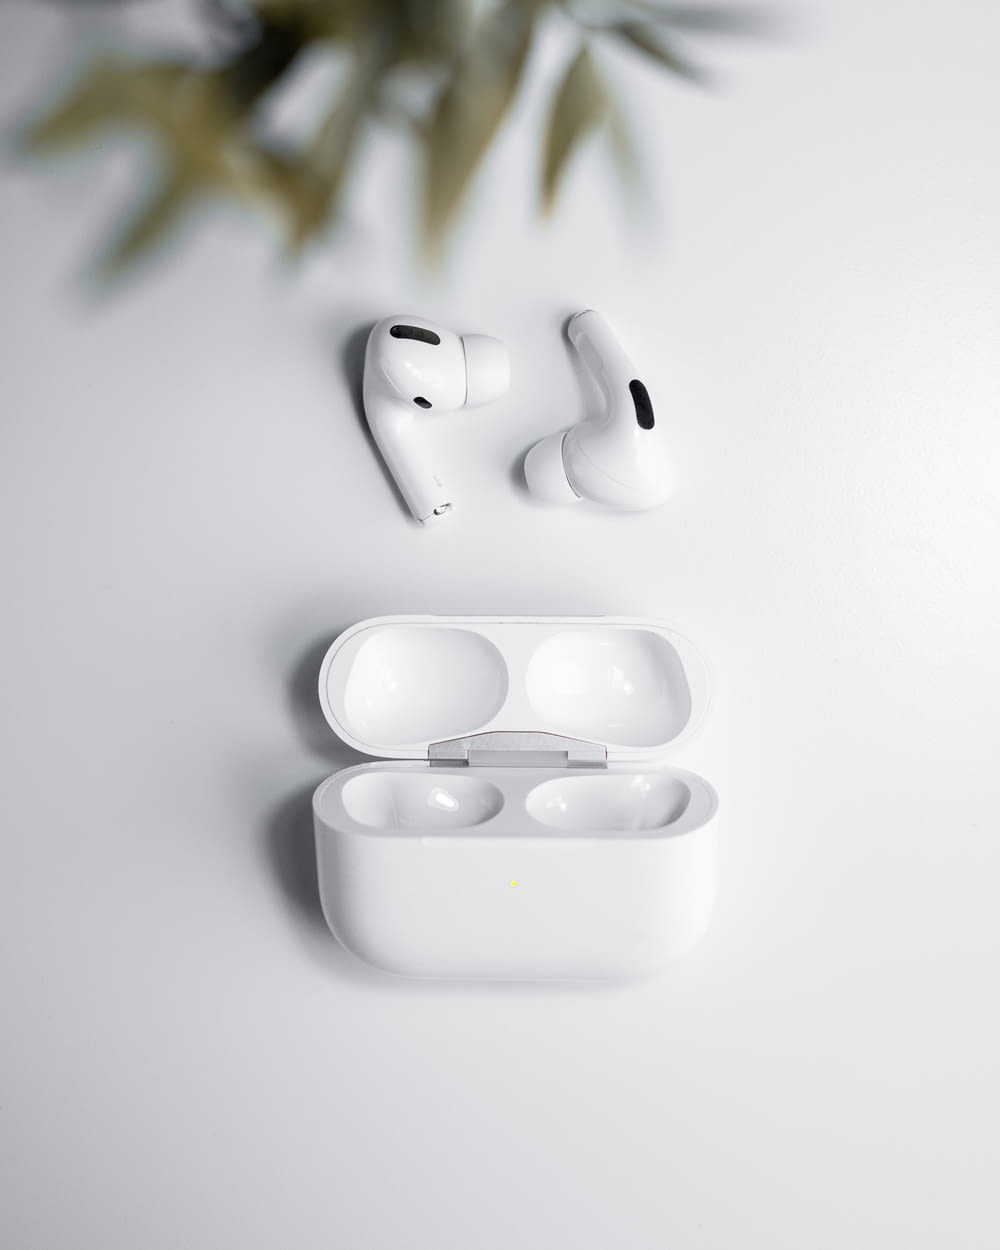 a pair of white earphones sitting on top of a table